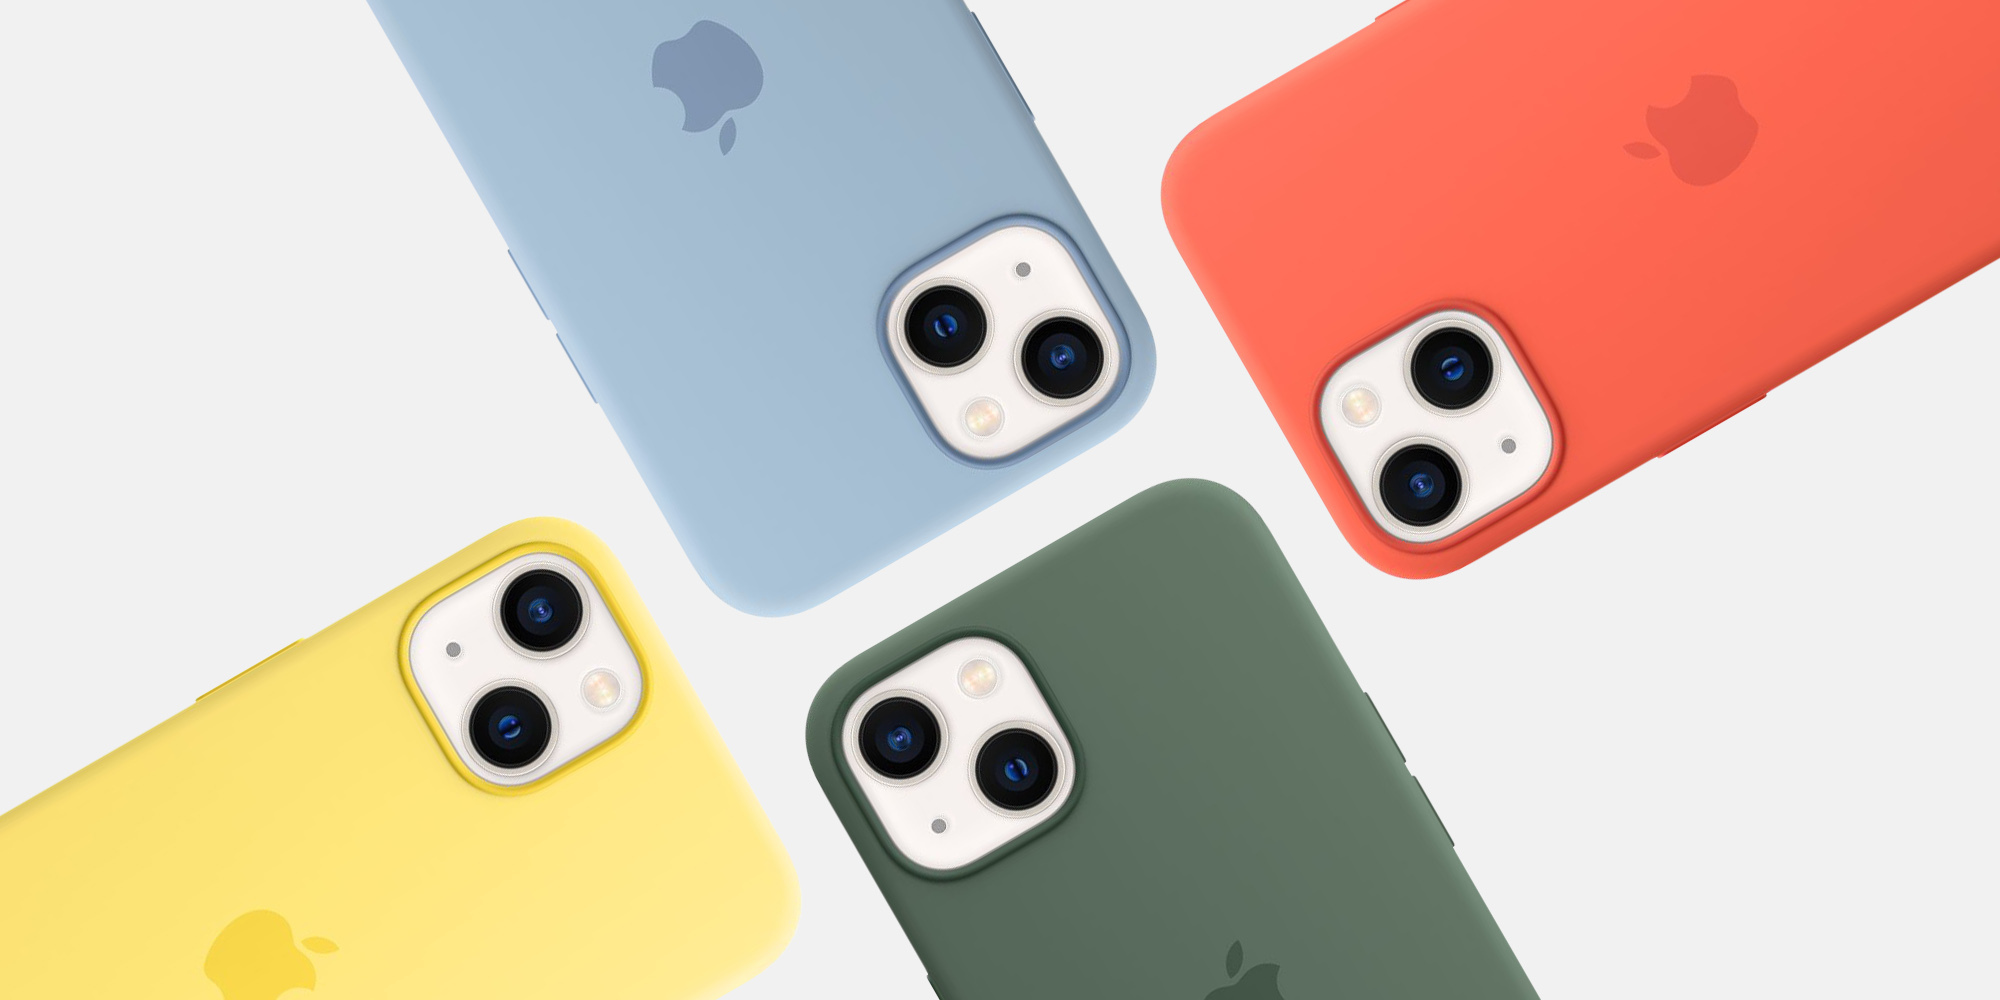 https://9to5toys.com/wp-content/uploads/sites/5/2022/05/apple-march-8-new-iphone-case-colors.jpg